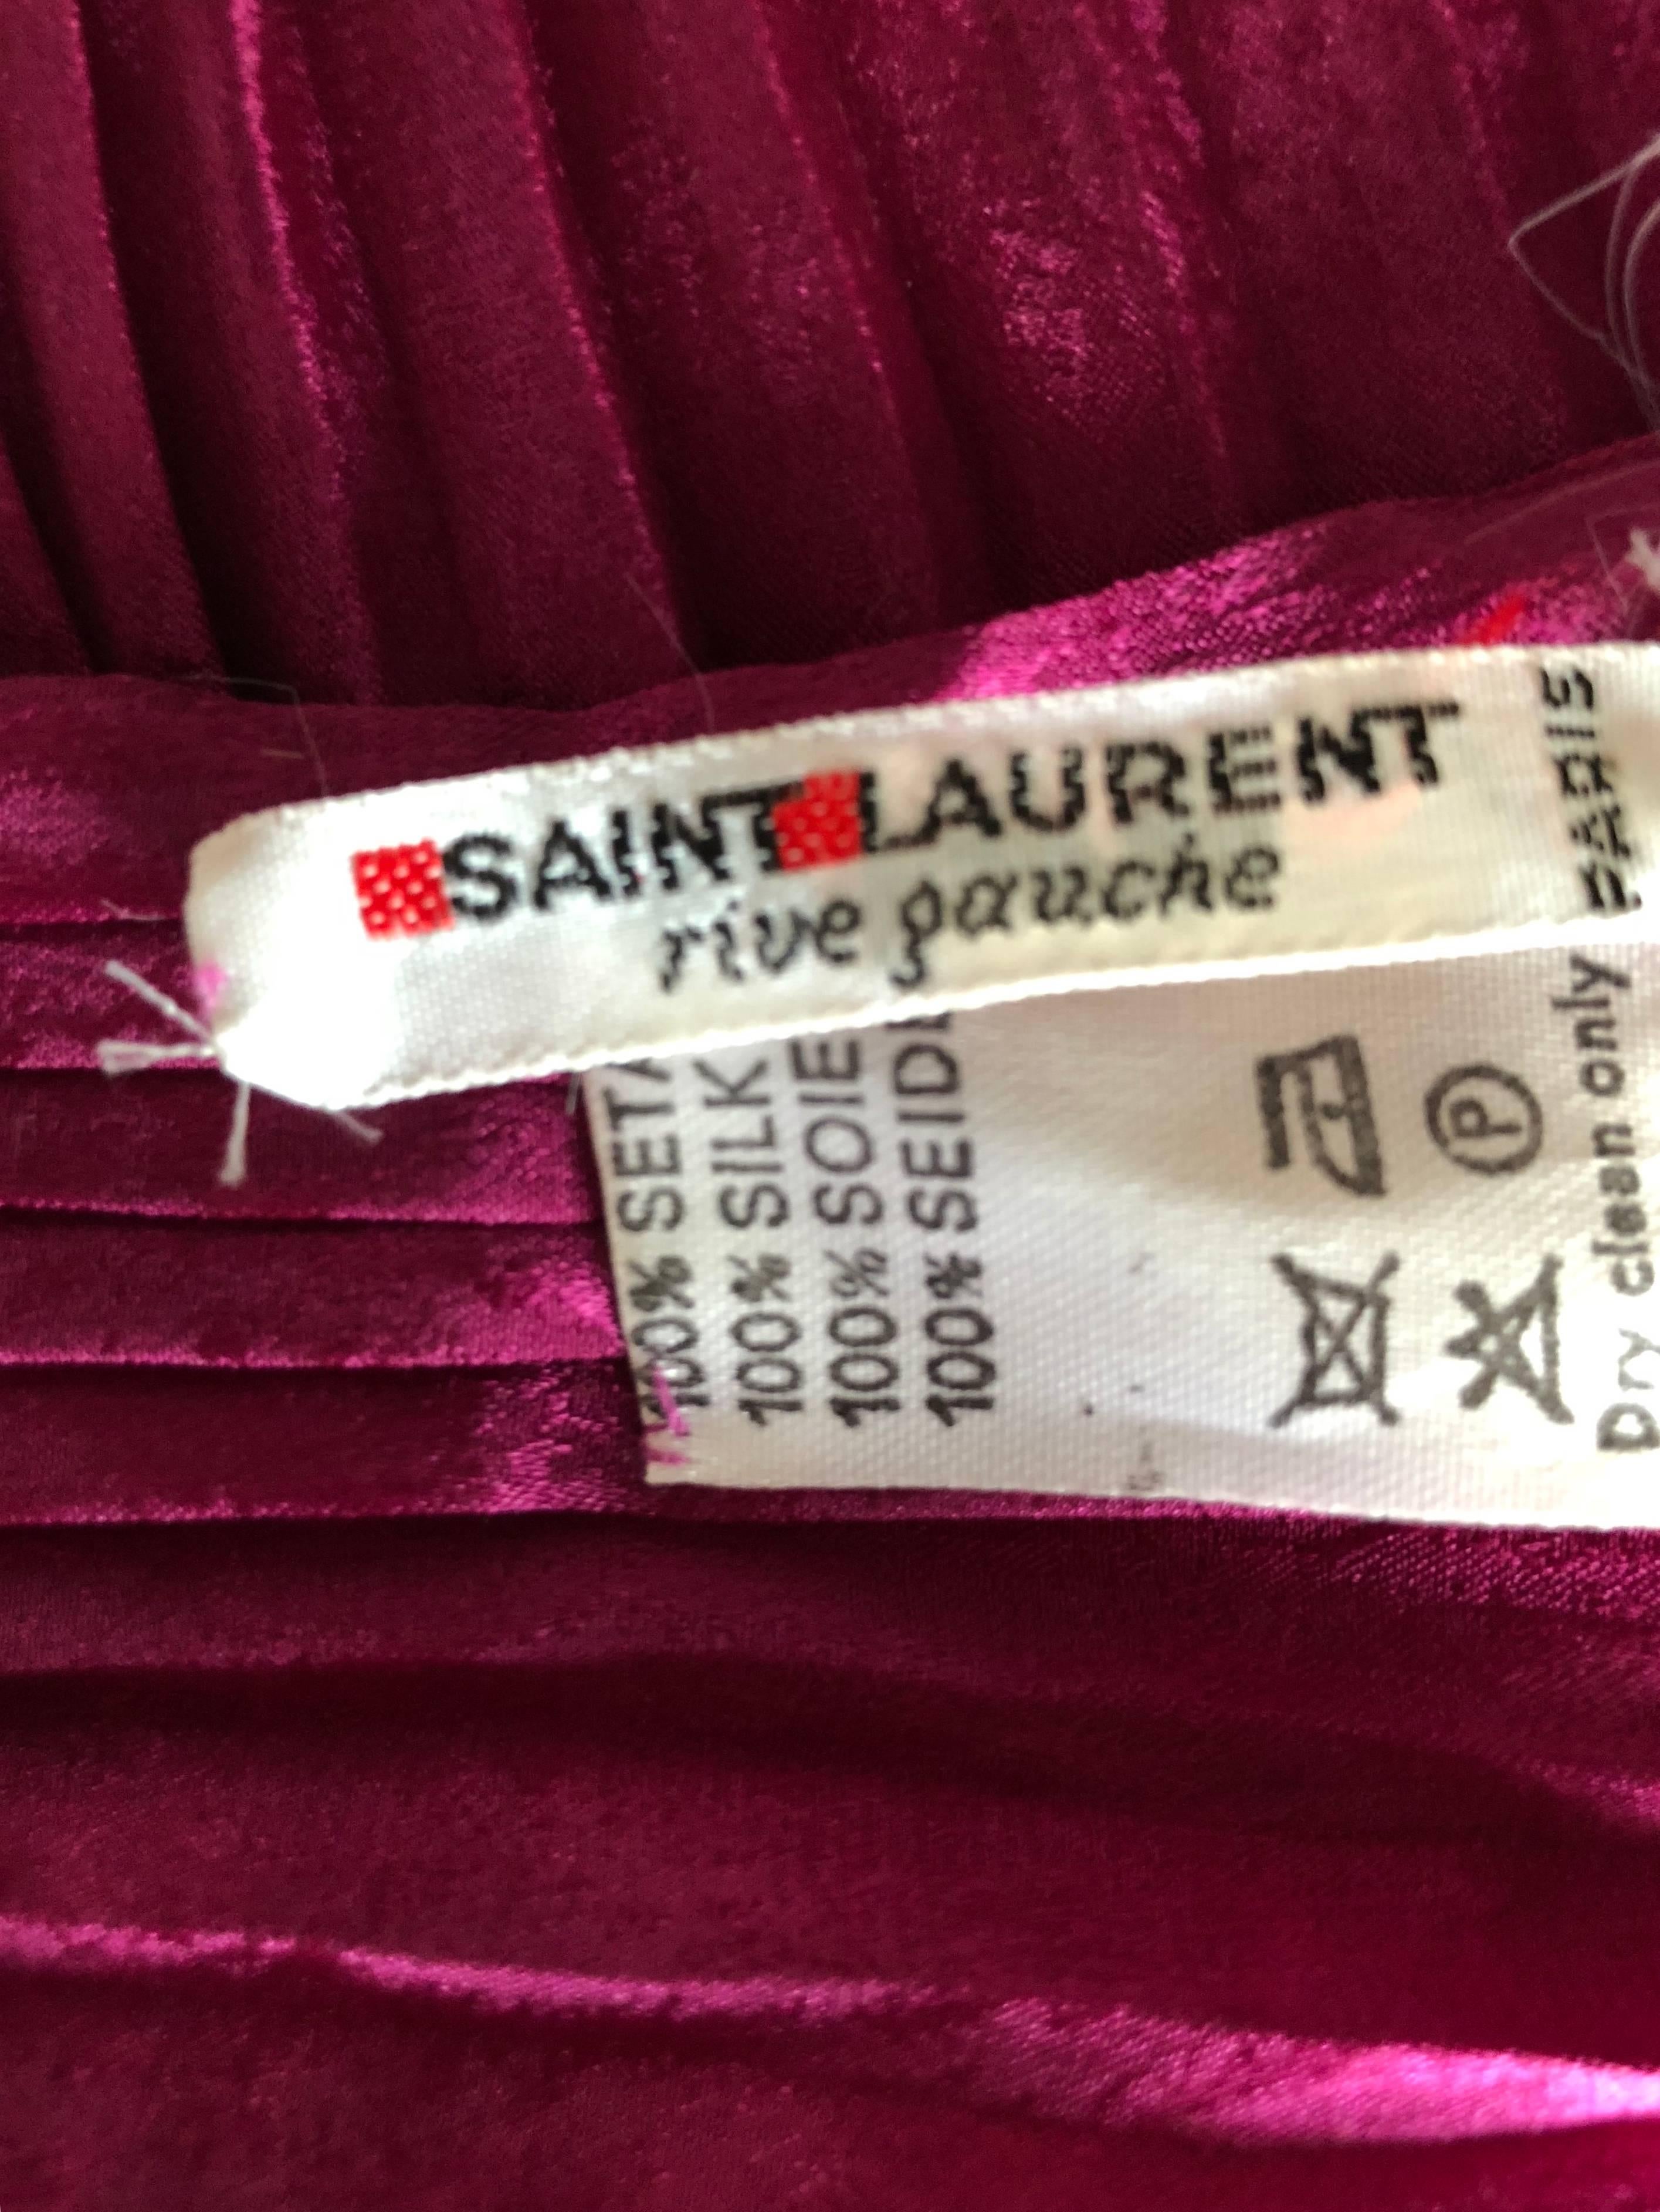 Beautiful vintage YVES SAINT LAURENT Rive Gauche fuchsia hot pink silk plisse oversized shawl / scarf! Features a slight iridescent sheen. Extremely versatile. Can be draped over the shoulders for evening, or swung across the neck. Easily dressed up